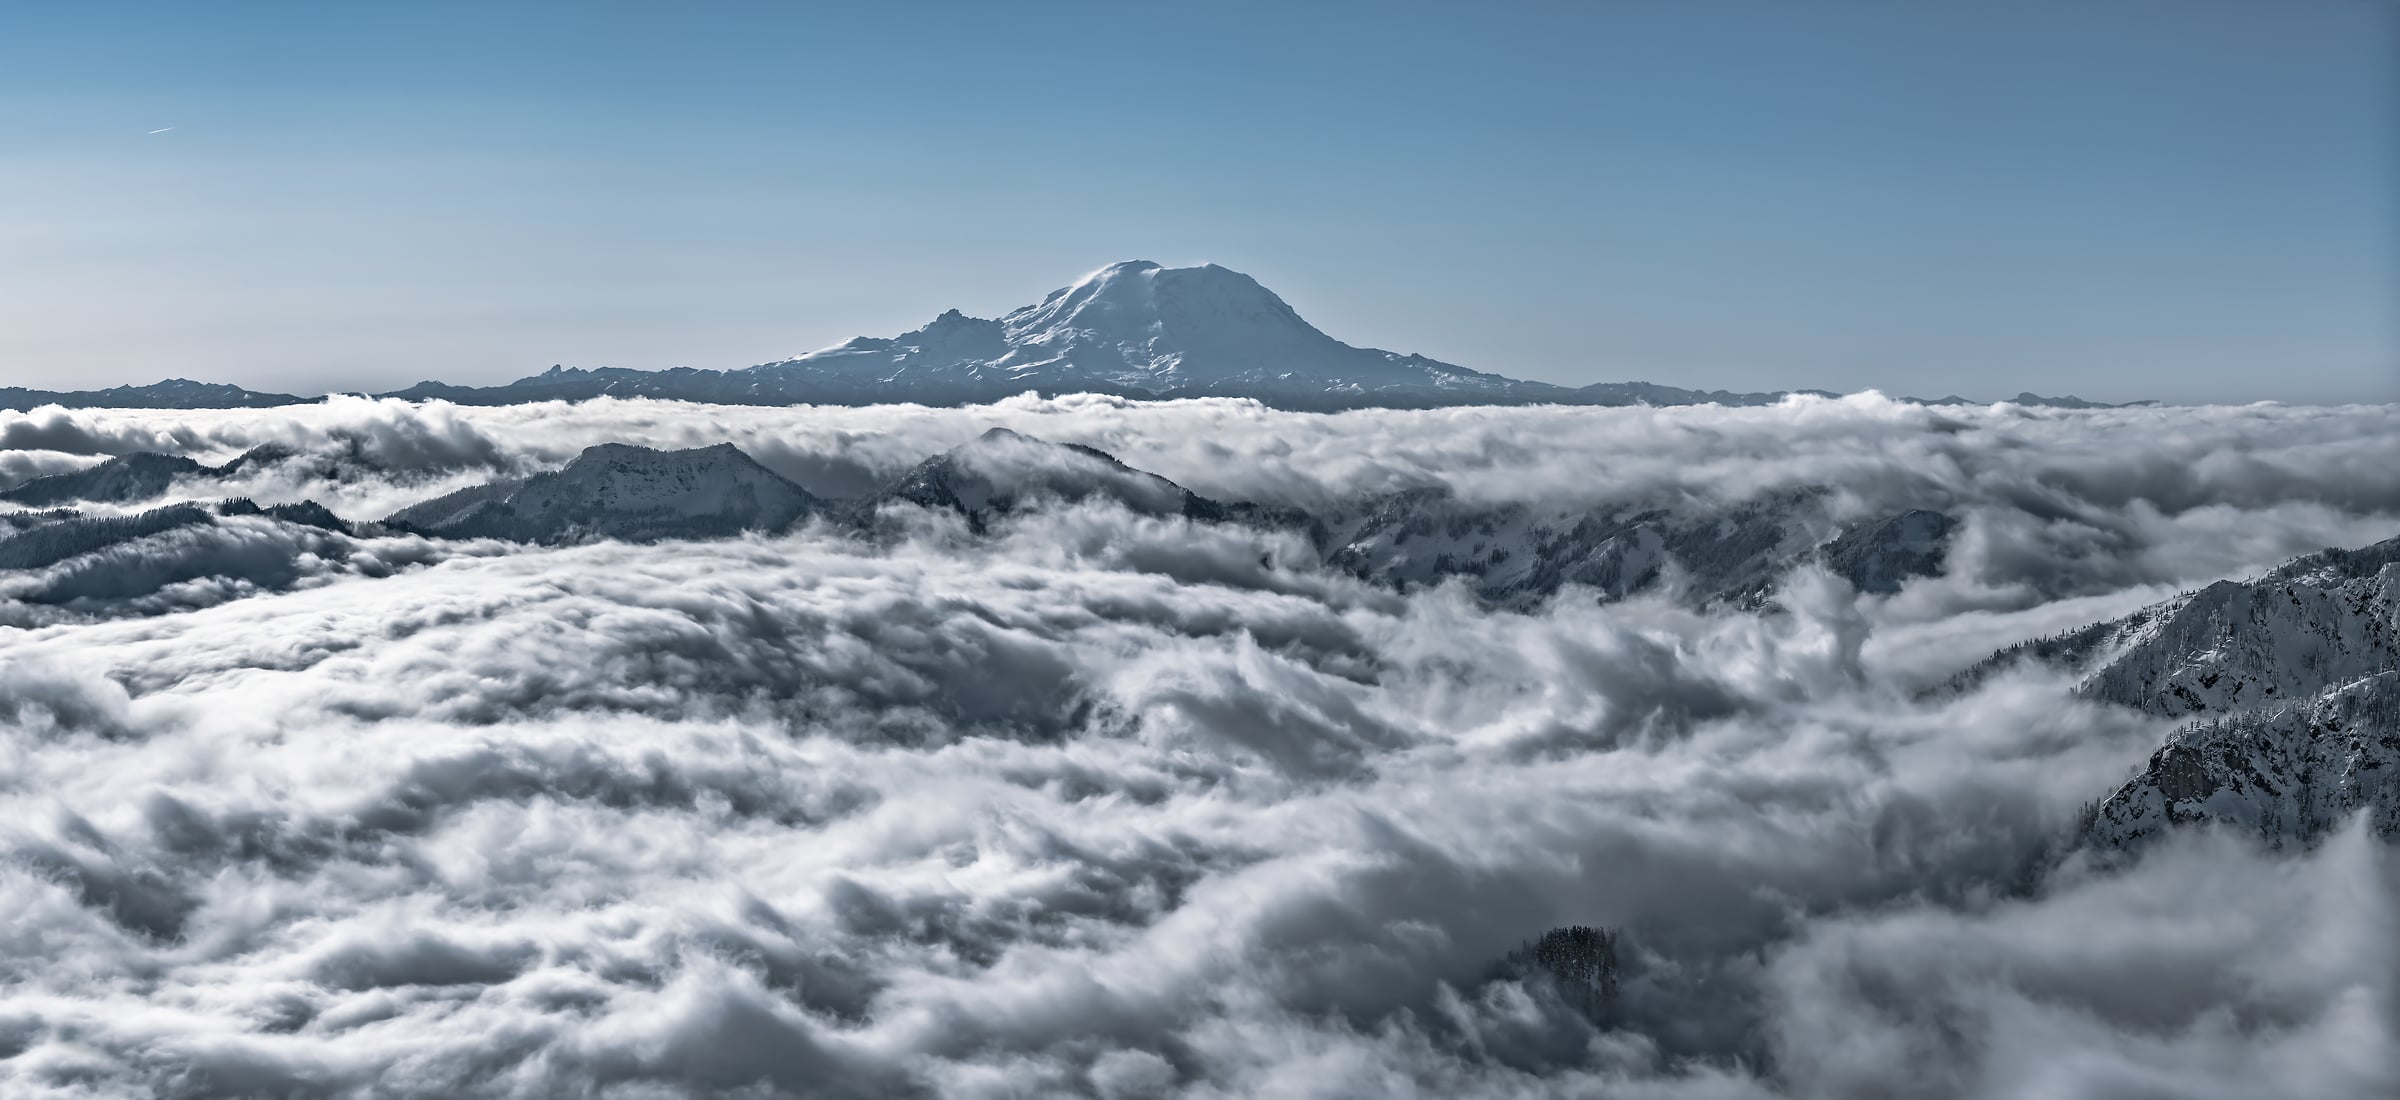 169 megapixels! A very high resolution, large-format VAST photo print of Mount Rainier and the Cascade Mountains among clouds; fine art landscape photo created by Scott Rinckenberger from Snoqualmie Mountain in Washington, USA.